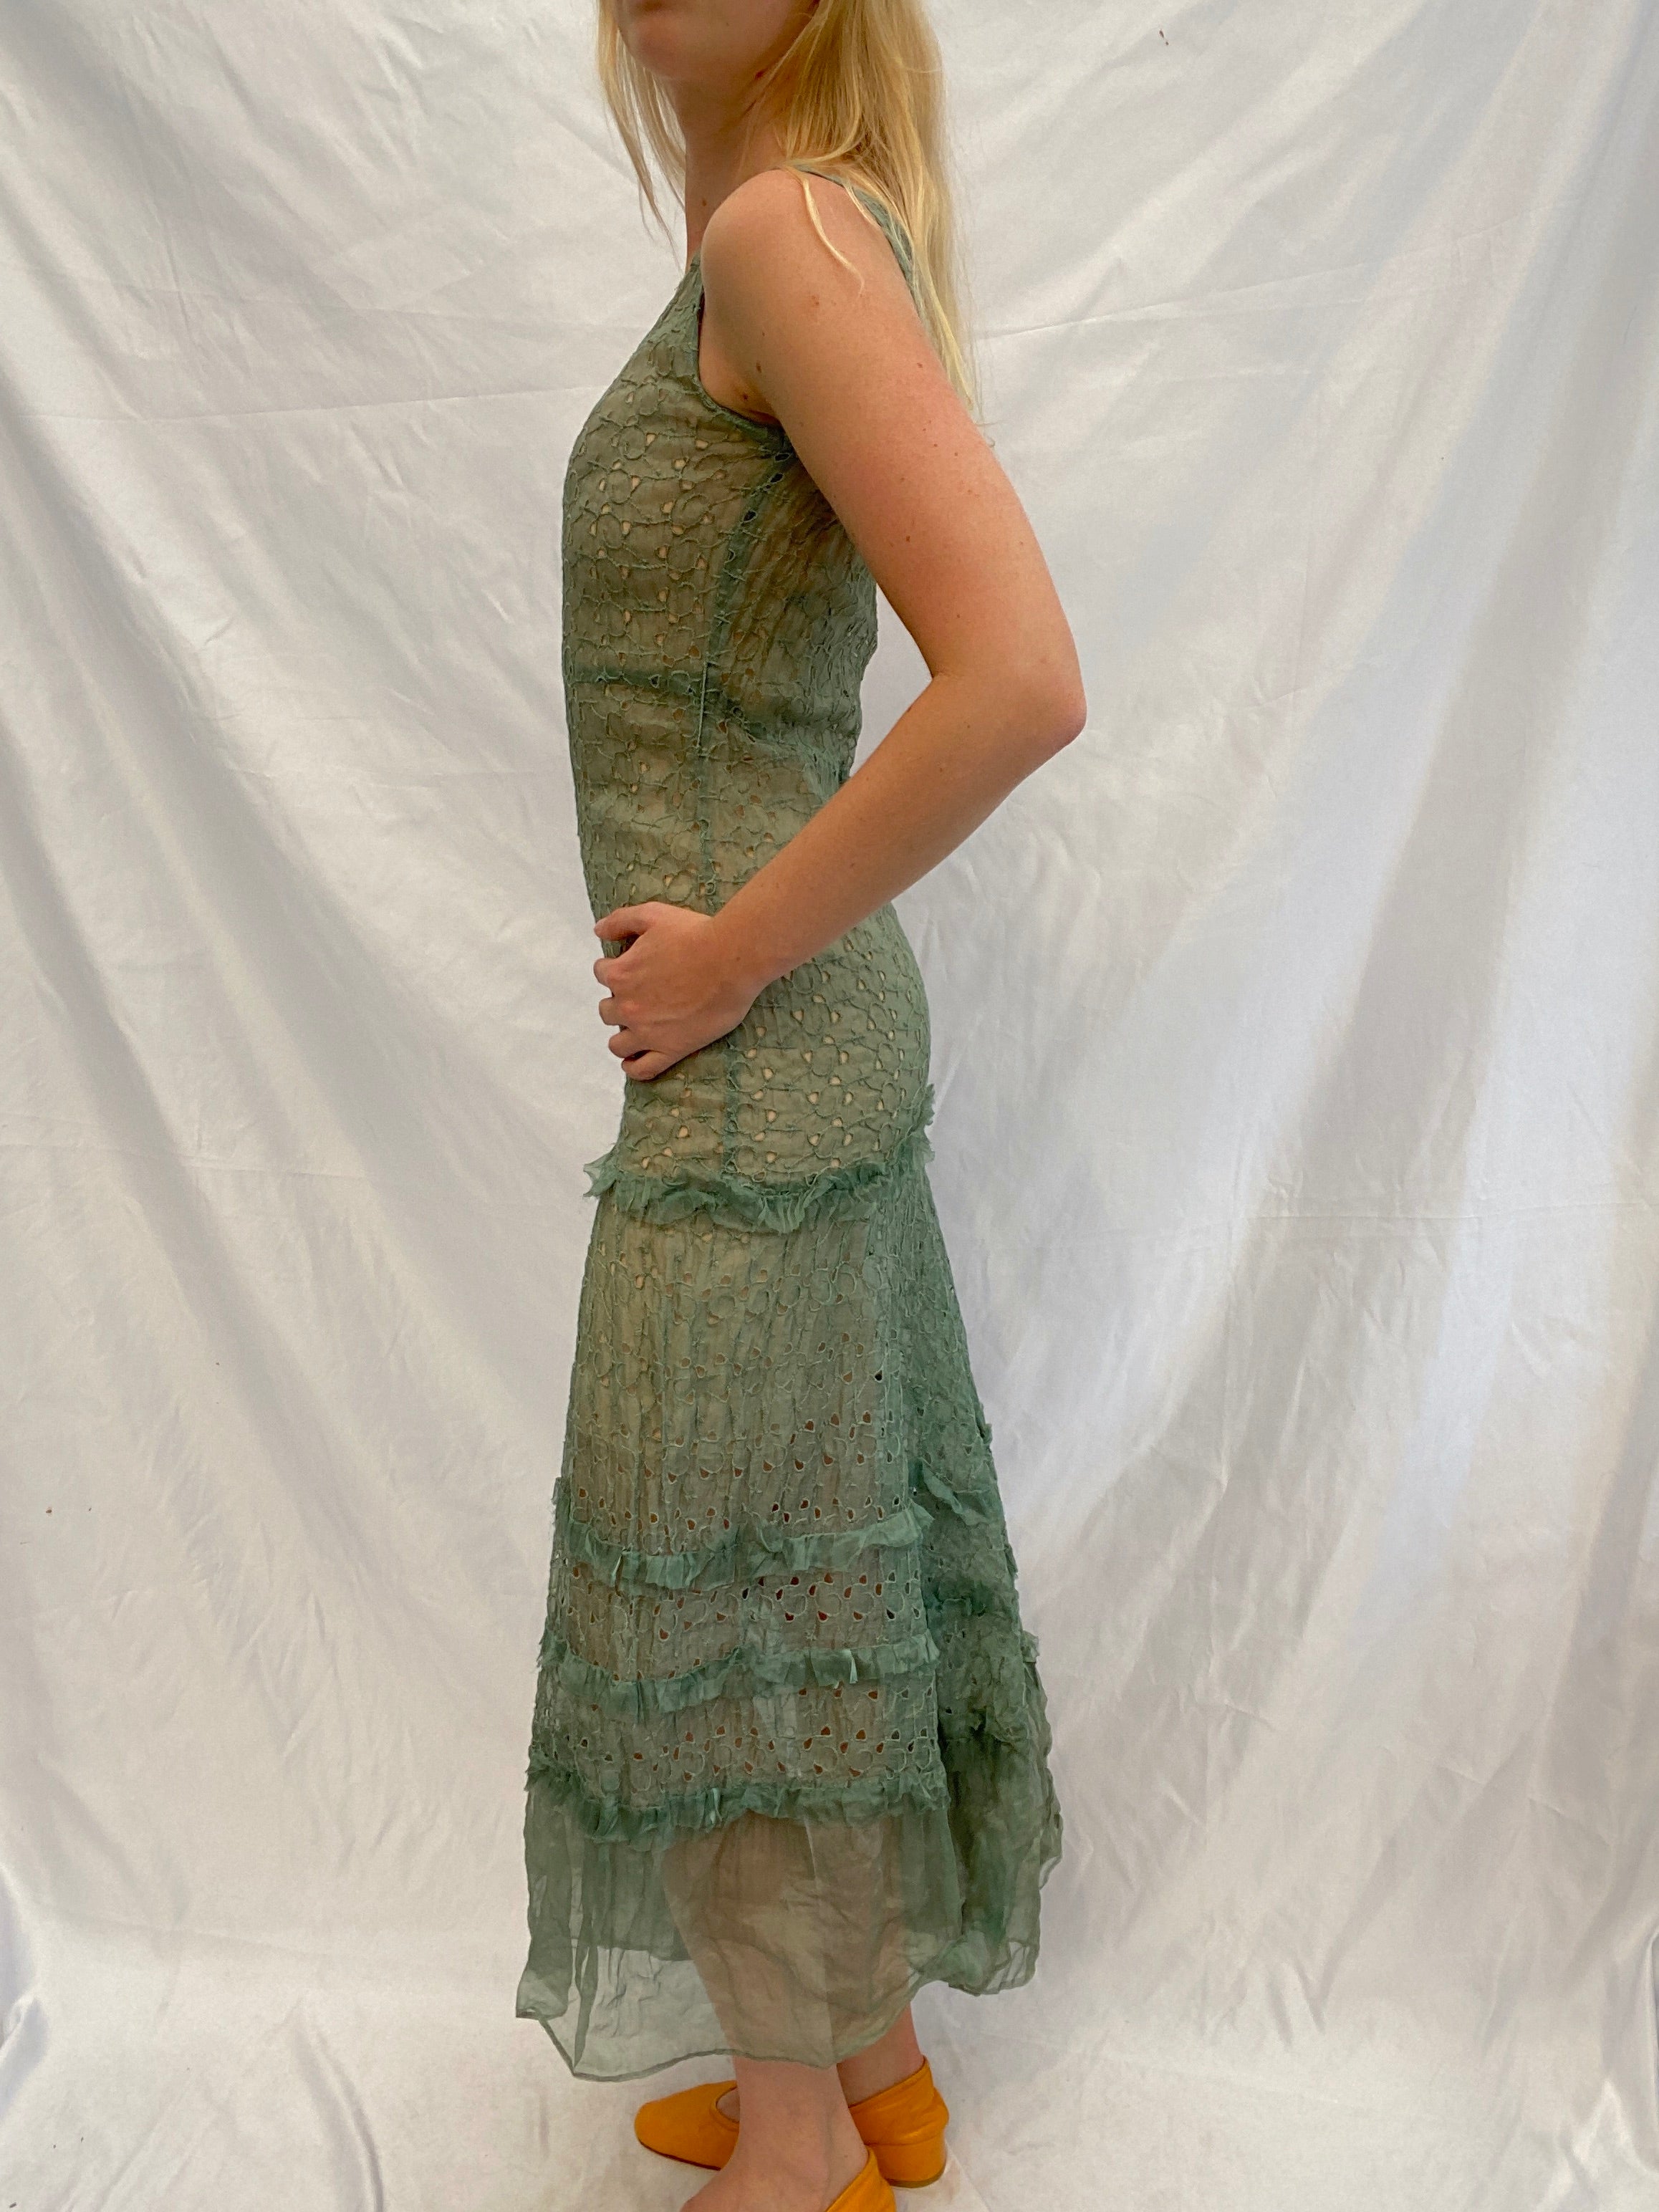 Hand Dyed Army Green Eyelet Dress